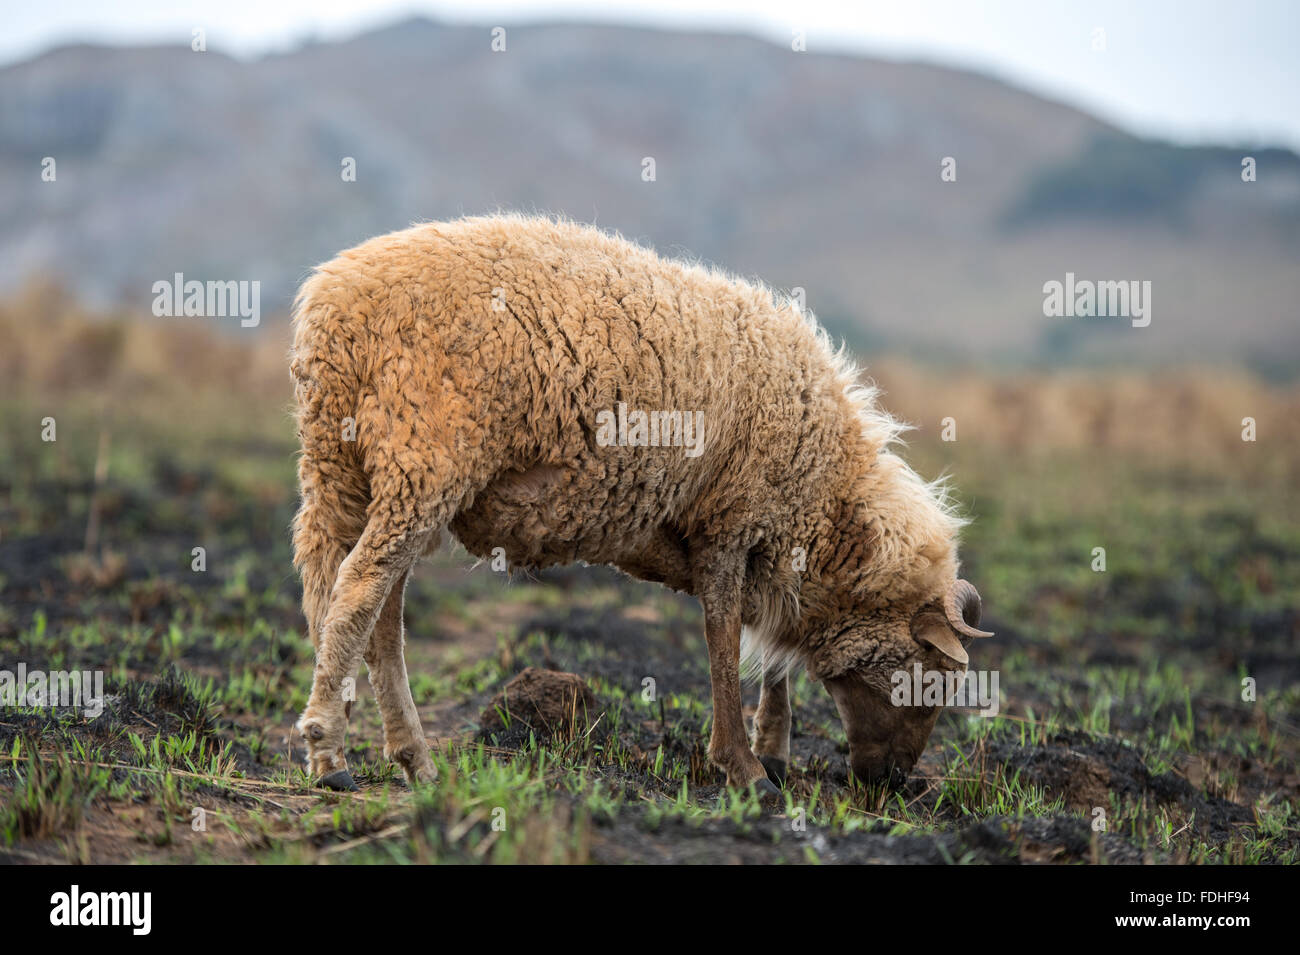 Sheep grazing in the Hhohho region of Swaziland, Africa. Stock Photo